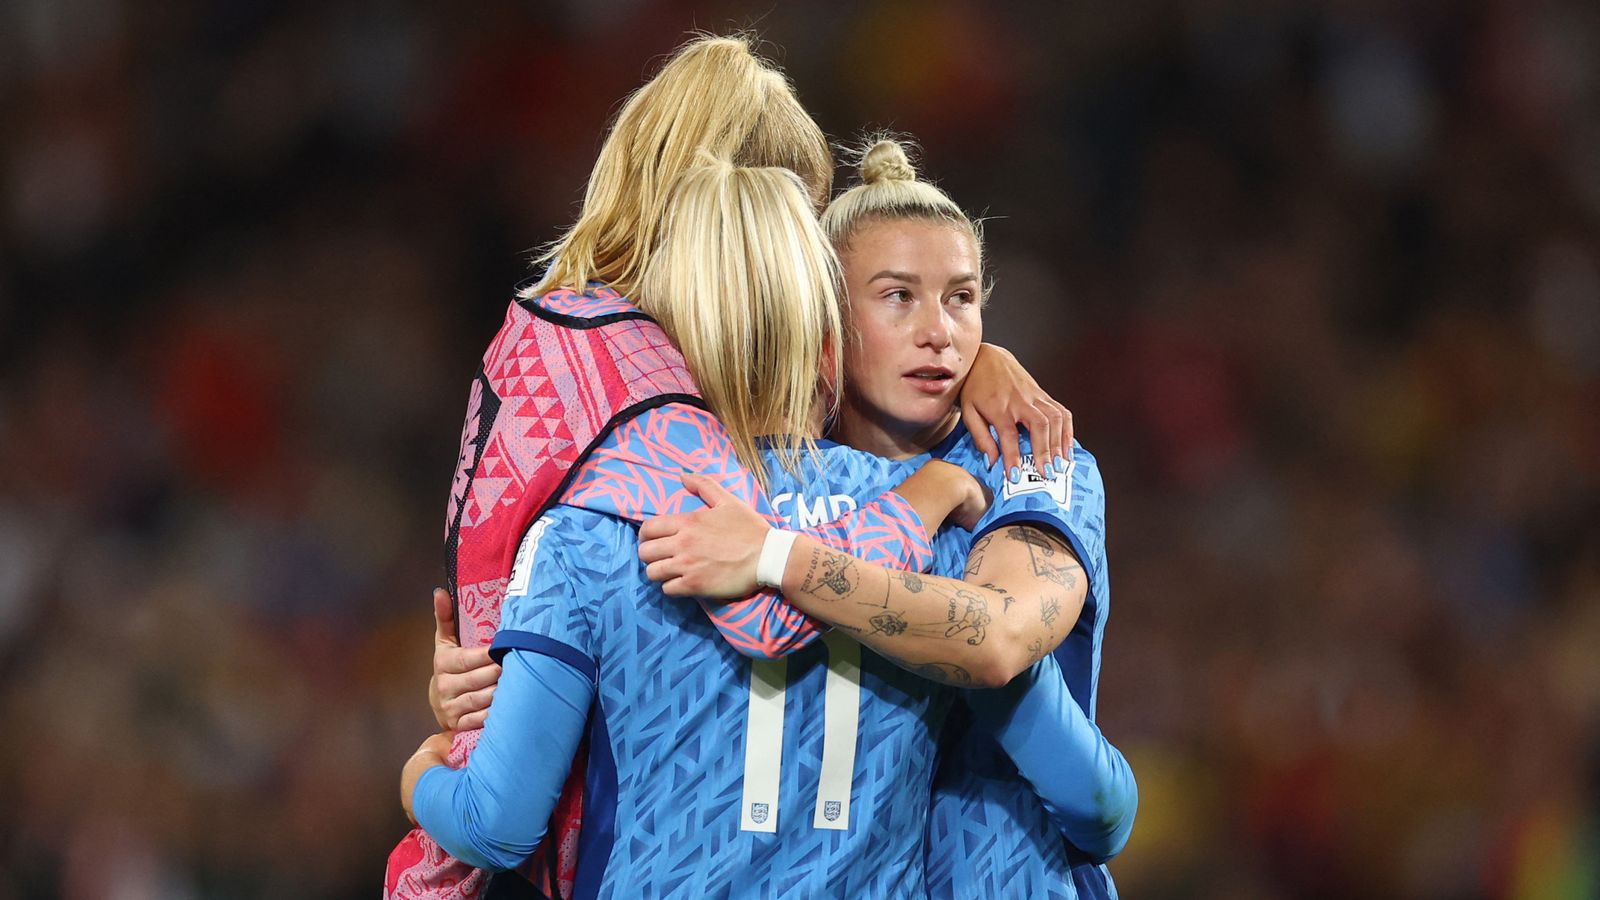 Women's World Cup: Heartbreak for England as Lionesses miss out on final glory after defeat to Spain